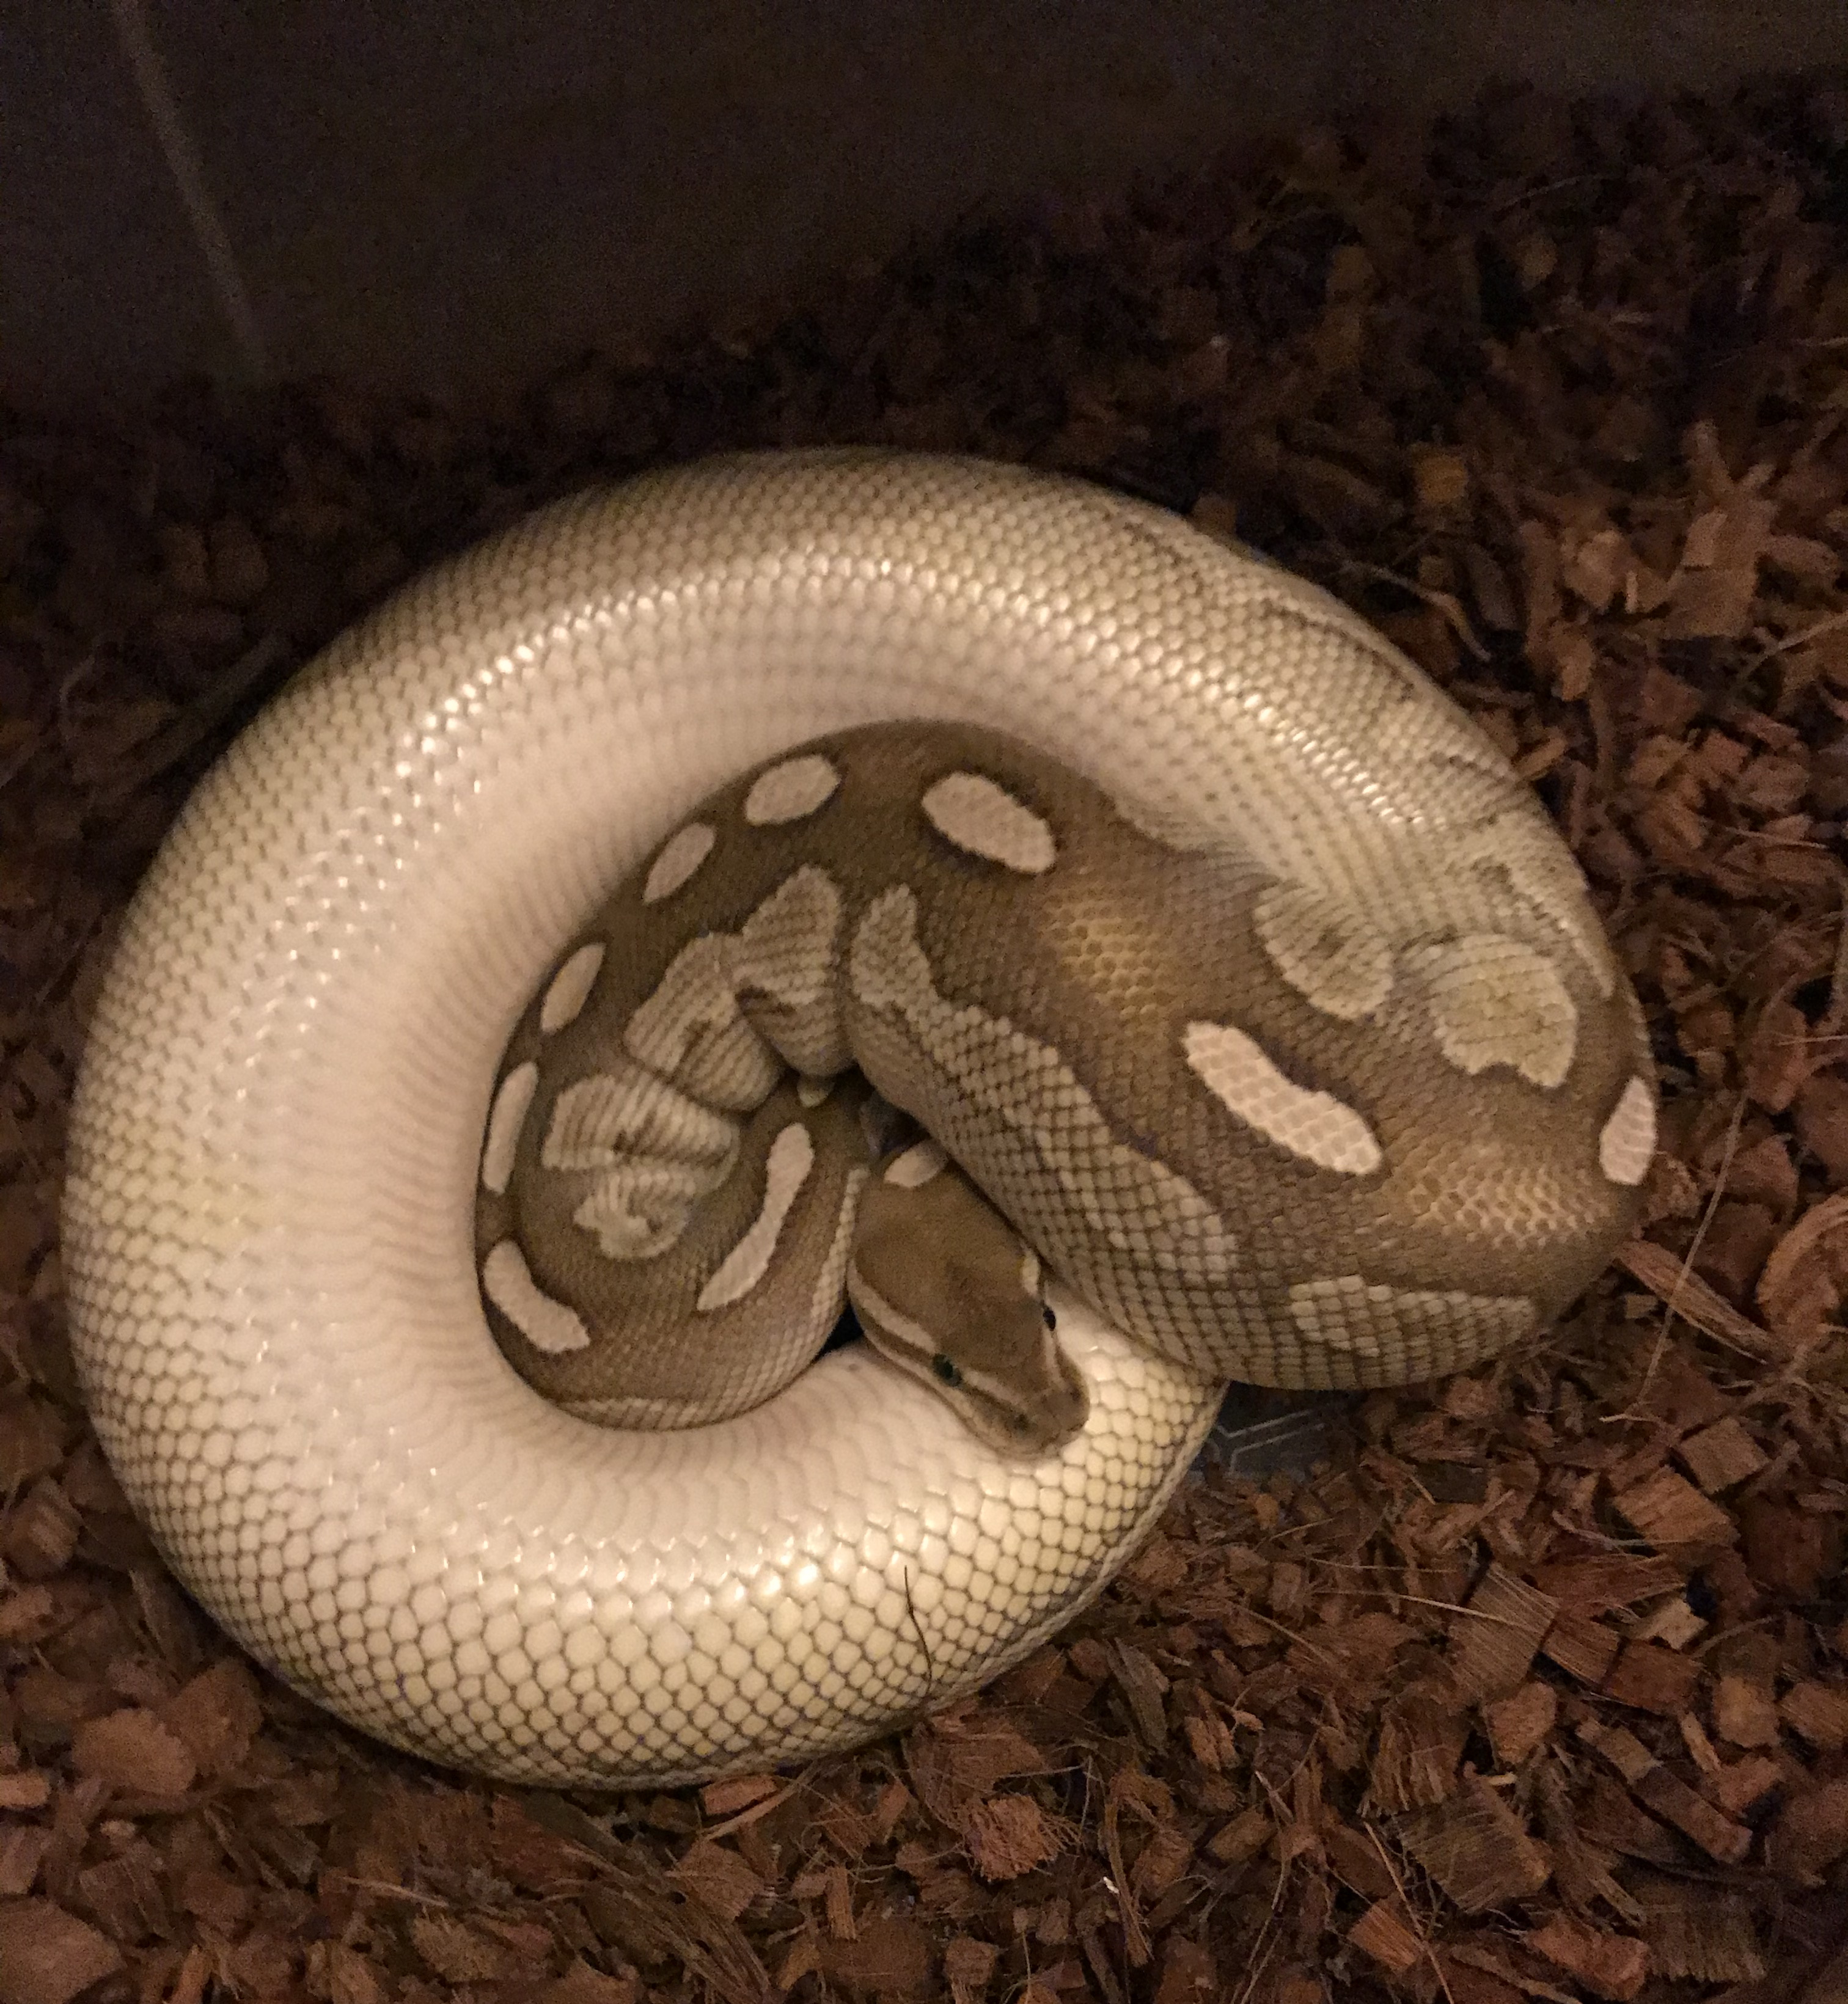 Female Royal Python laying with belly facing upwards